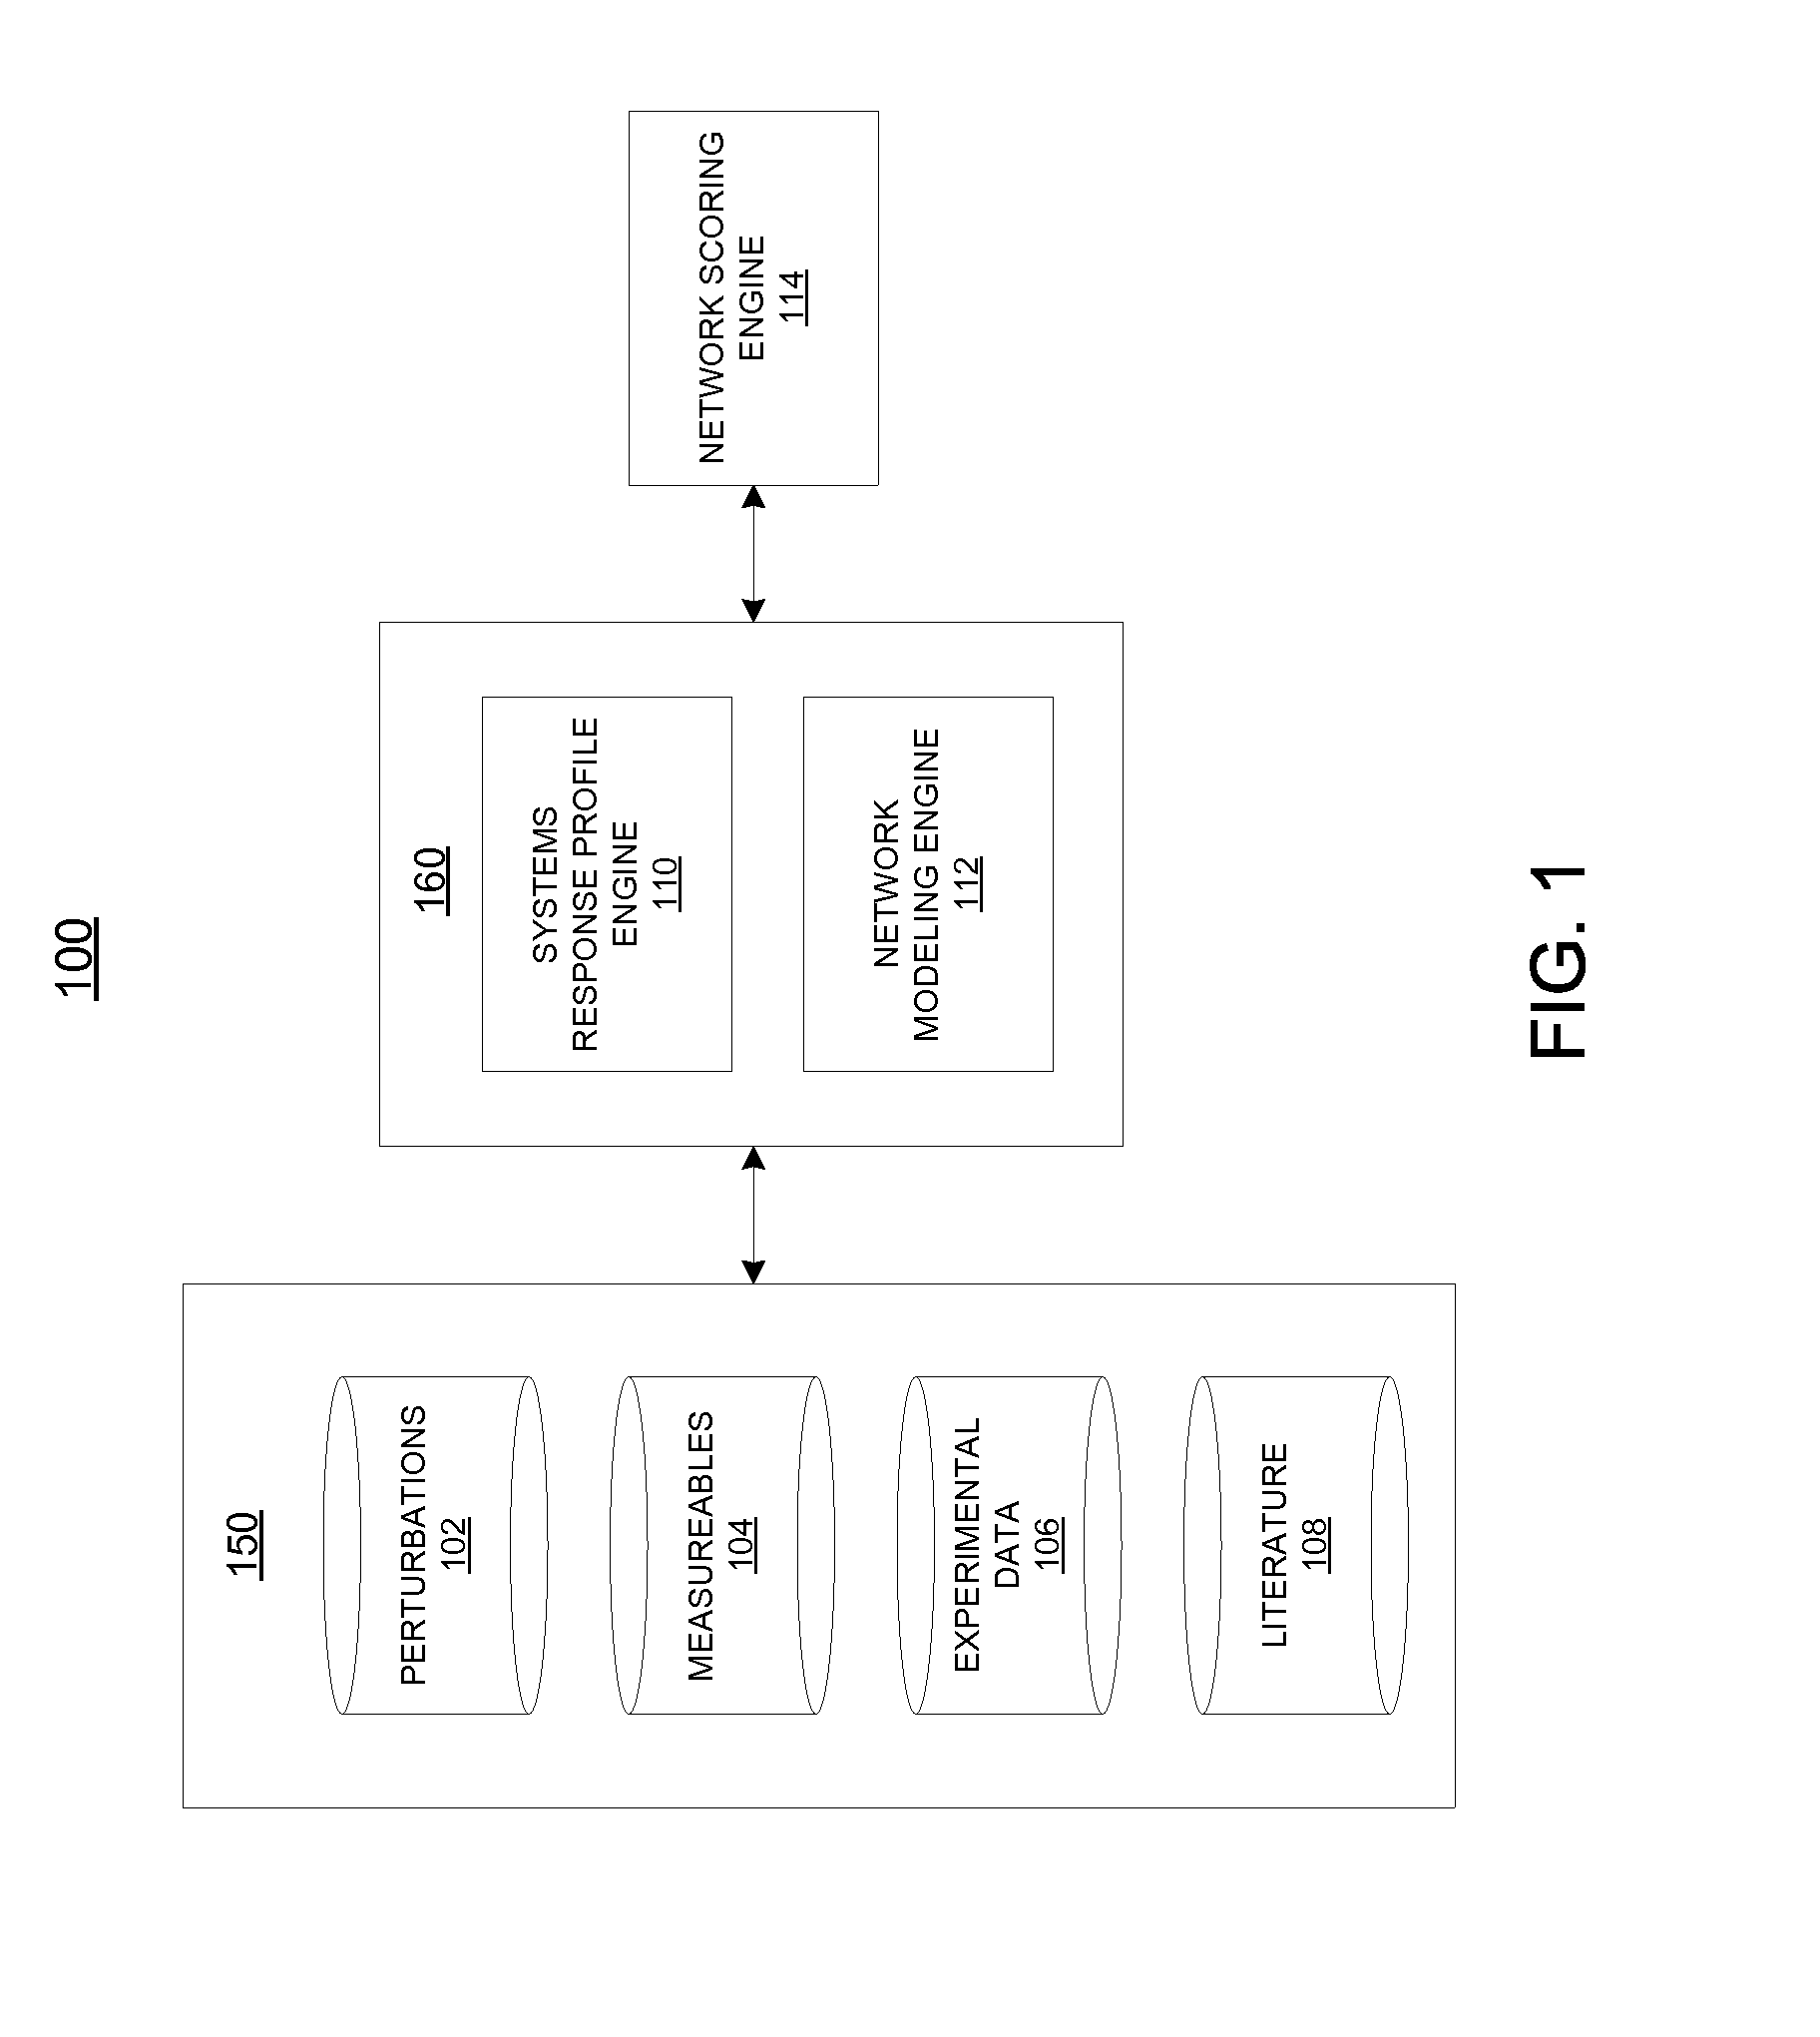 Systems and methods relating to network-based biomarker signatures